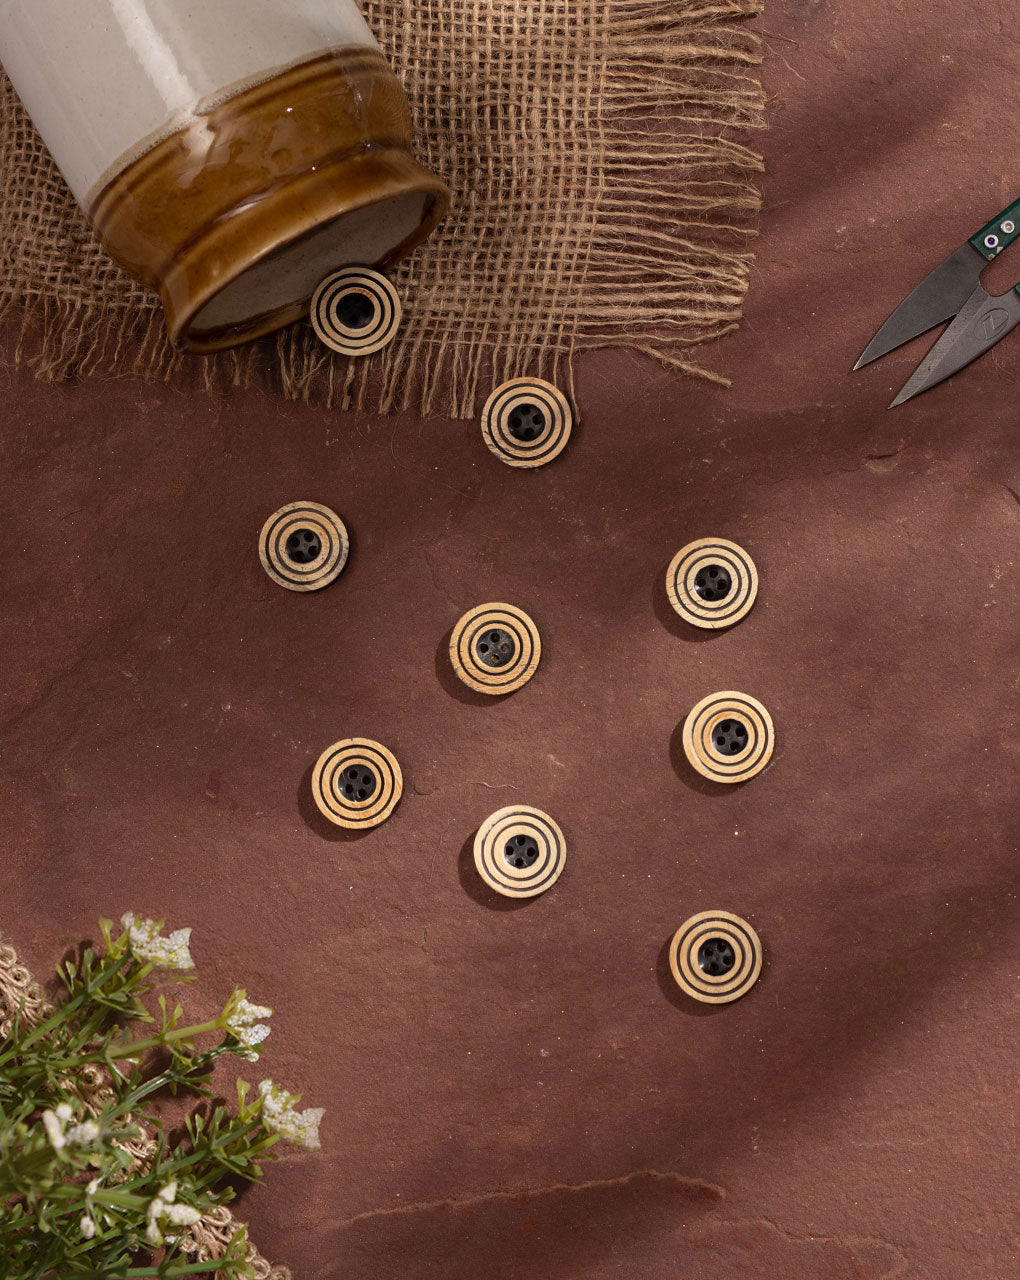 Engraved Horn Buttons ( Set Of 6 ) - Fabriclore.com